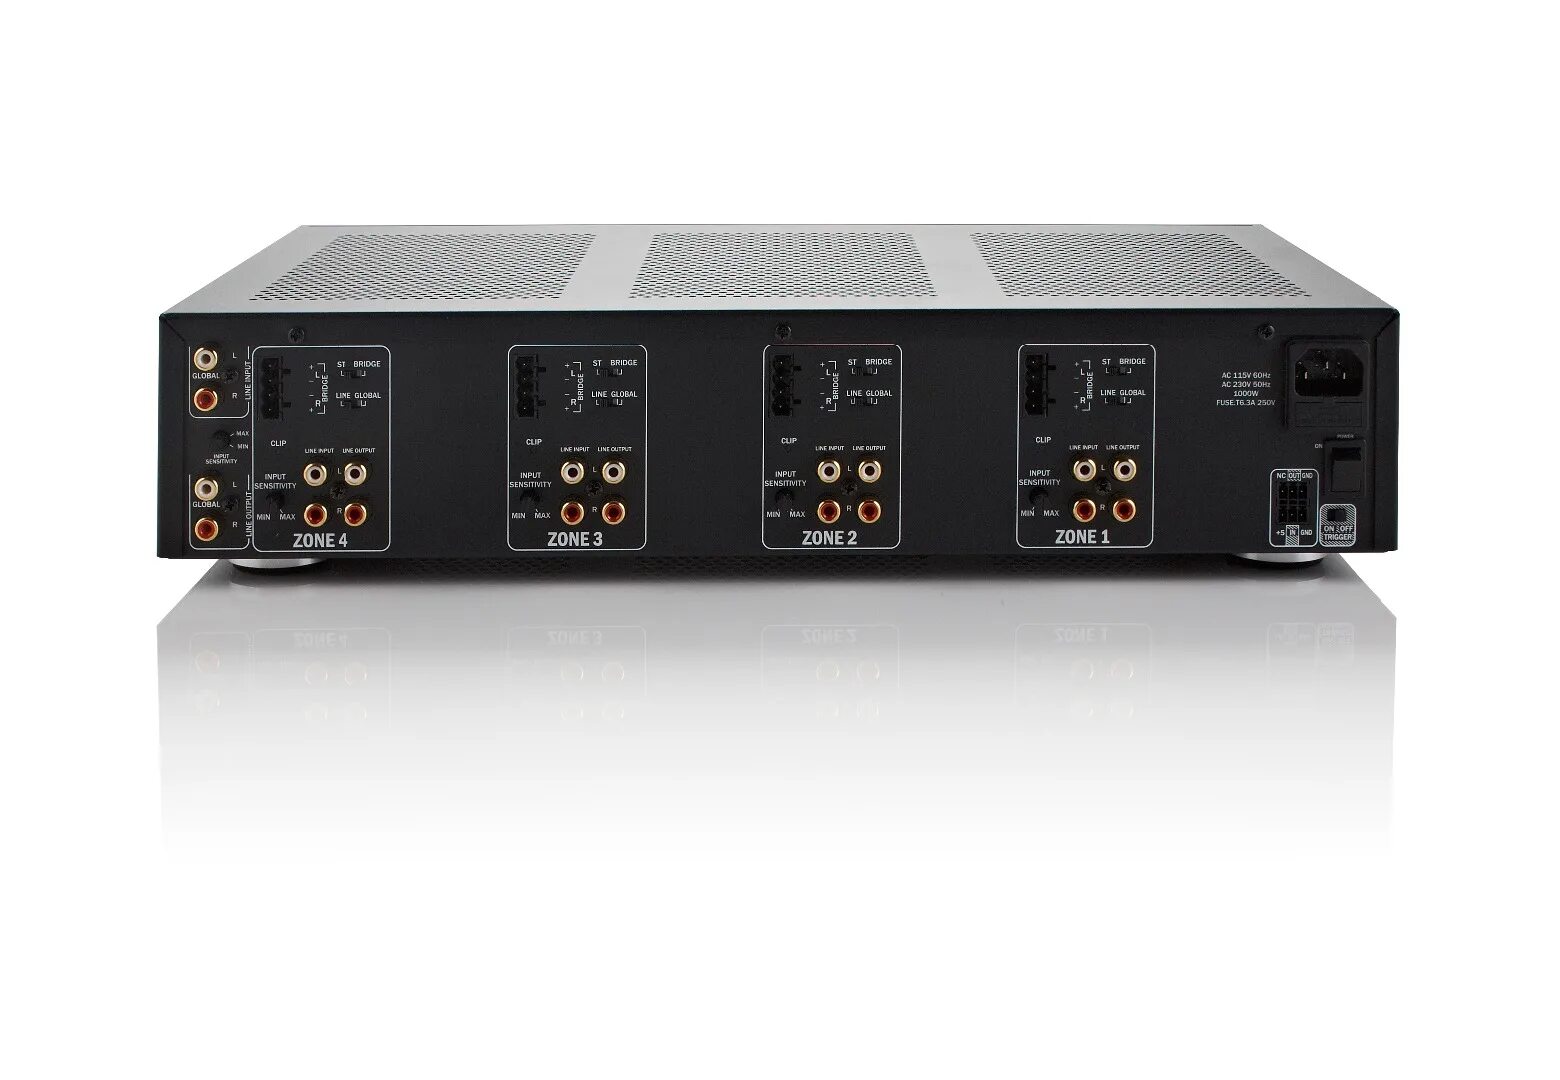 Control4 4-Zone/8-channel Power Amplifier. Amp4 усилитель. Control4 4-Zone/8-channel Power Amplifier, 100 WPC. Amp 4 канальный усилитель.